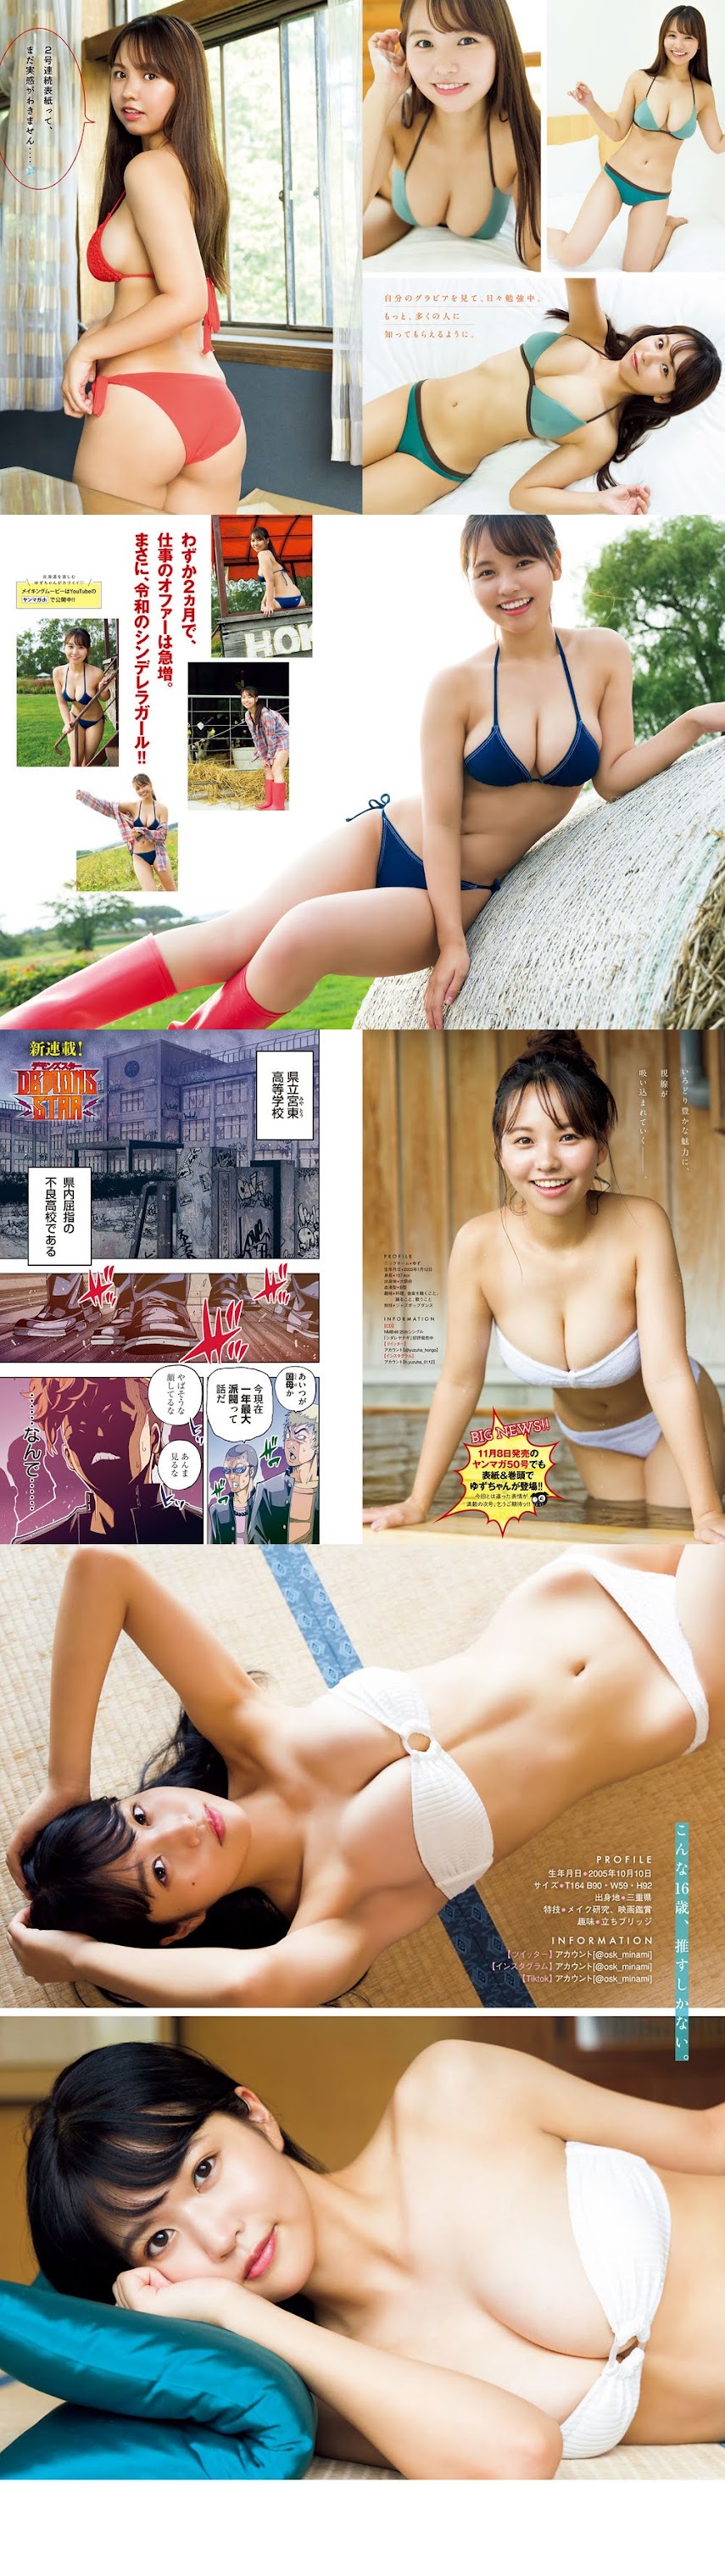 [Young Magazine] 2021 No.49 (本郷柚巴 南みゆか)   P214283